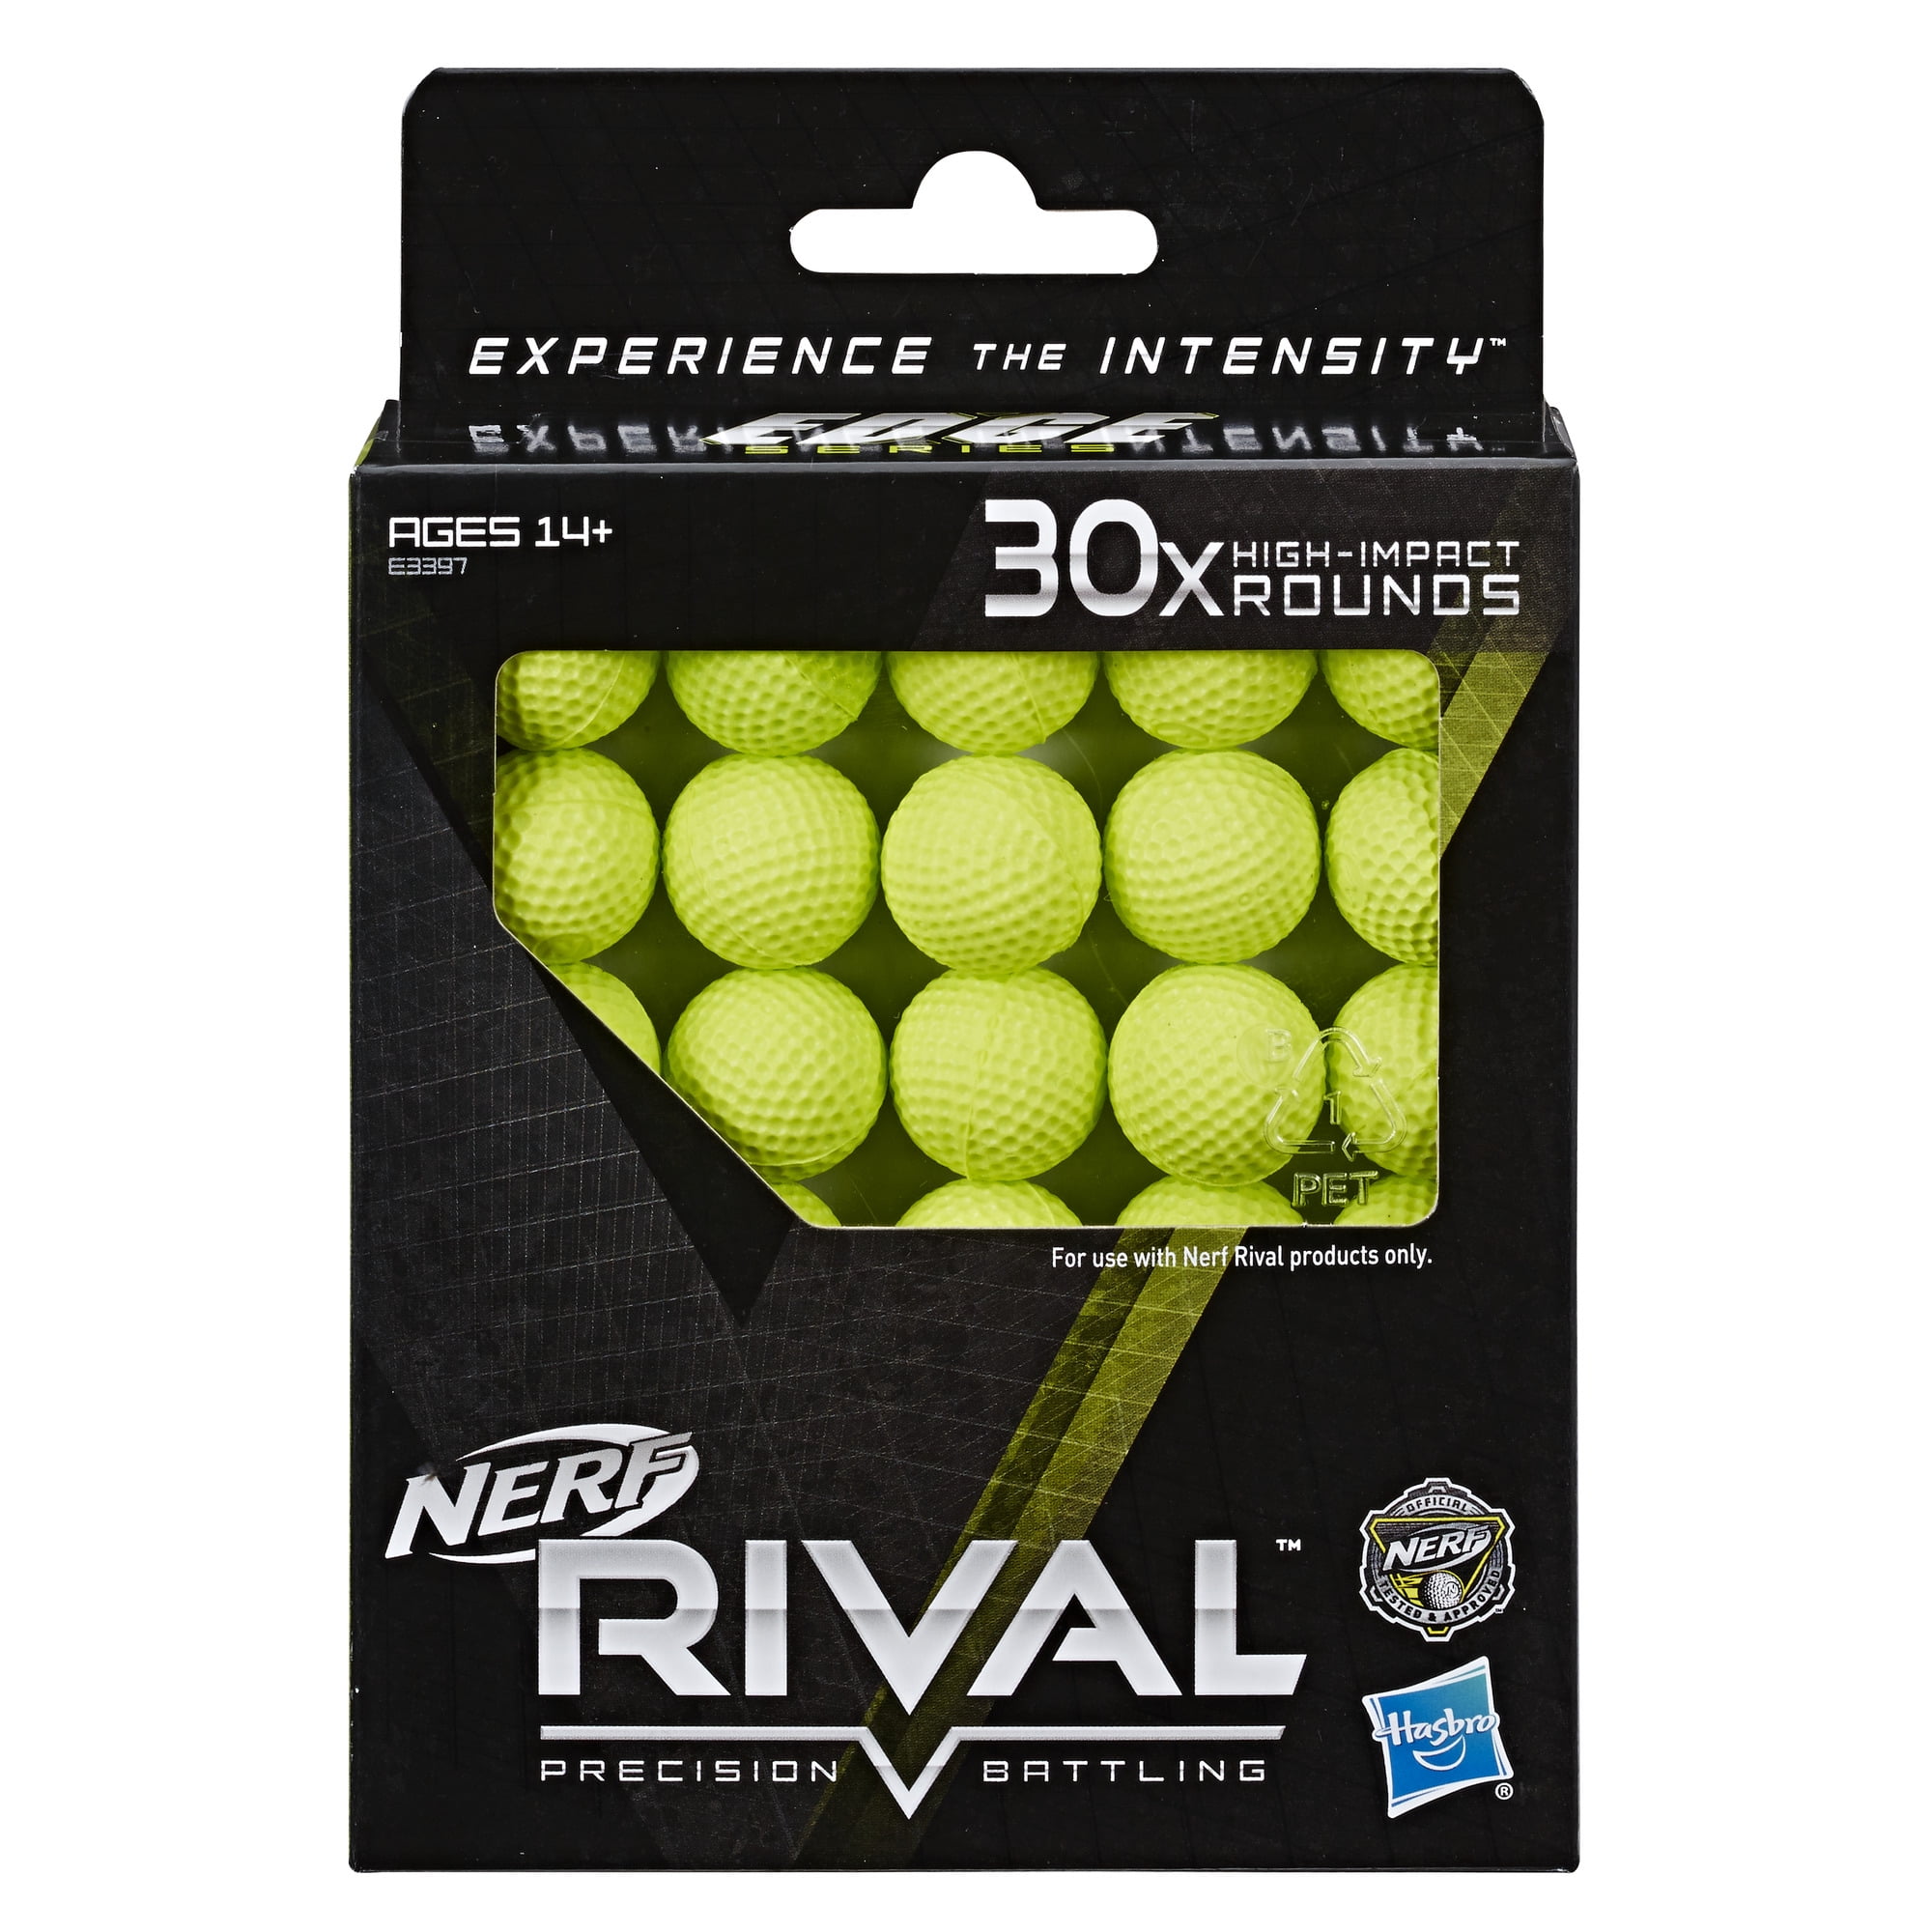 NERF Rival Overwatch Balls 30x High Impact Rounds Refill Pack 